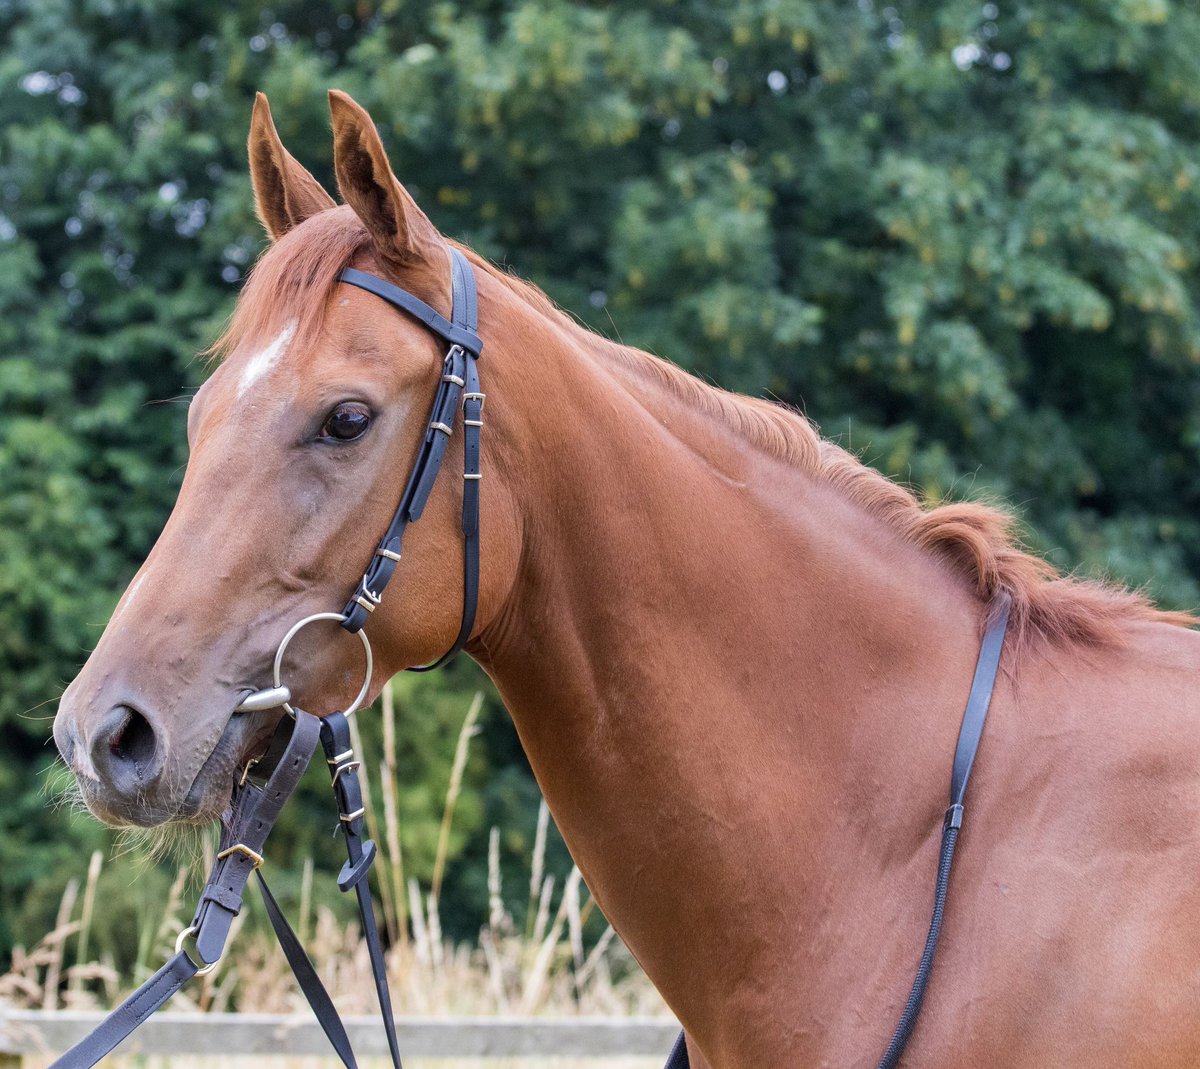 One runner today. Show Compassion heads to @WolvesRaces tonight with @FMcmanoman riding. Good luck to connections.